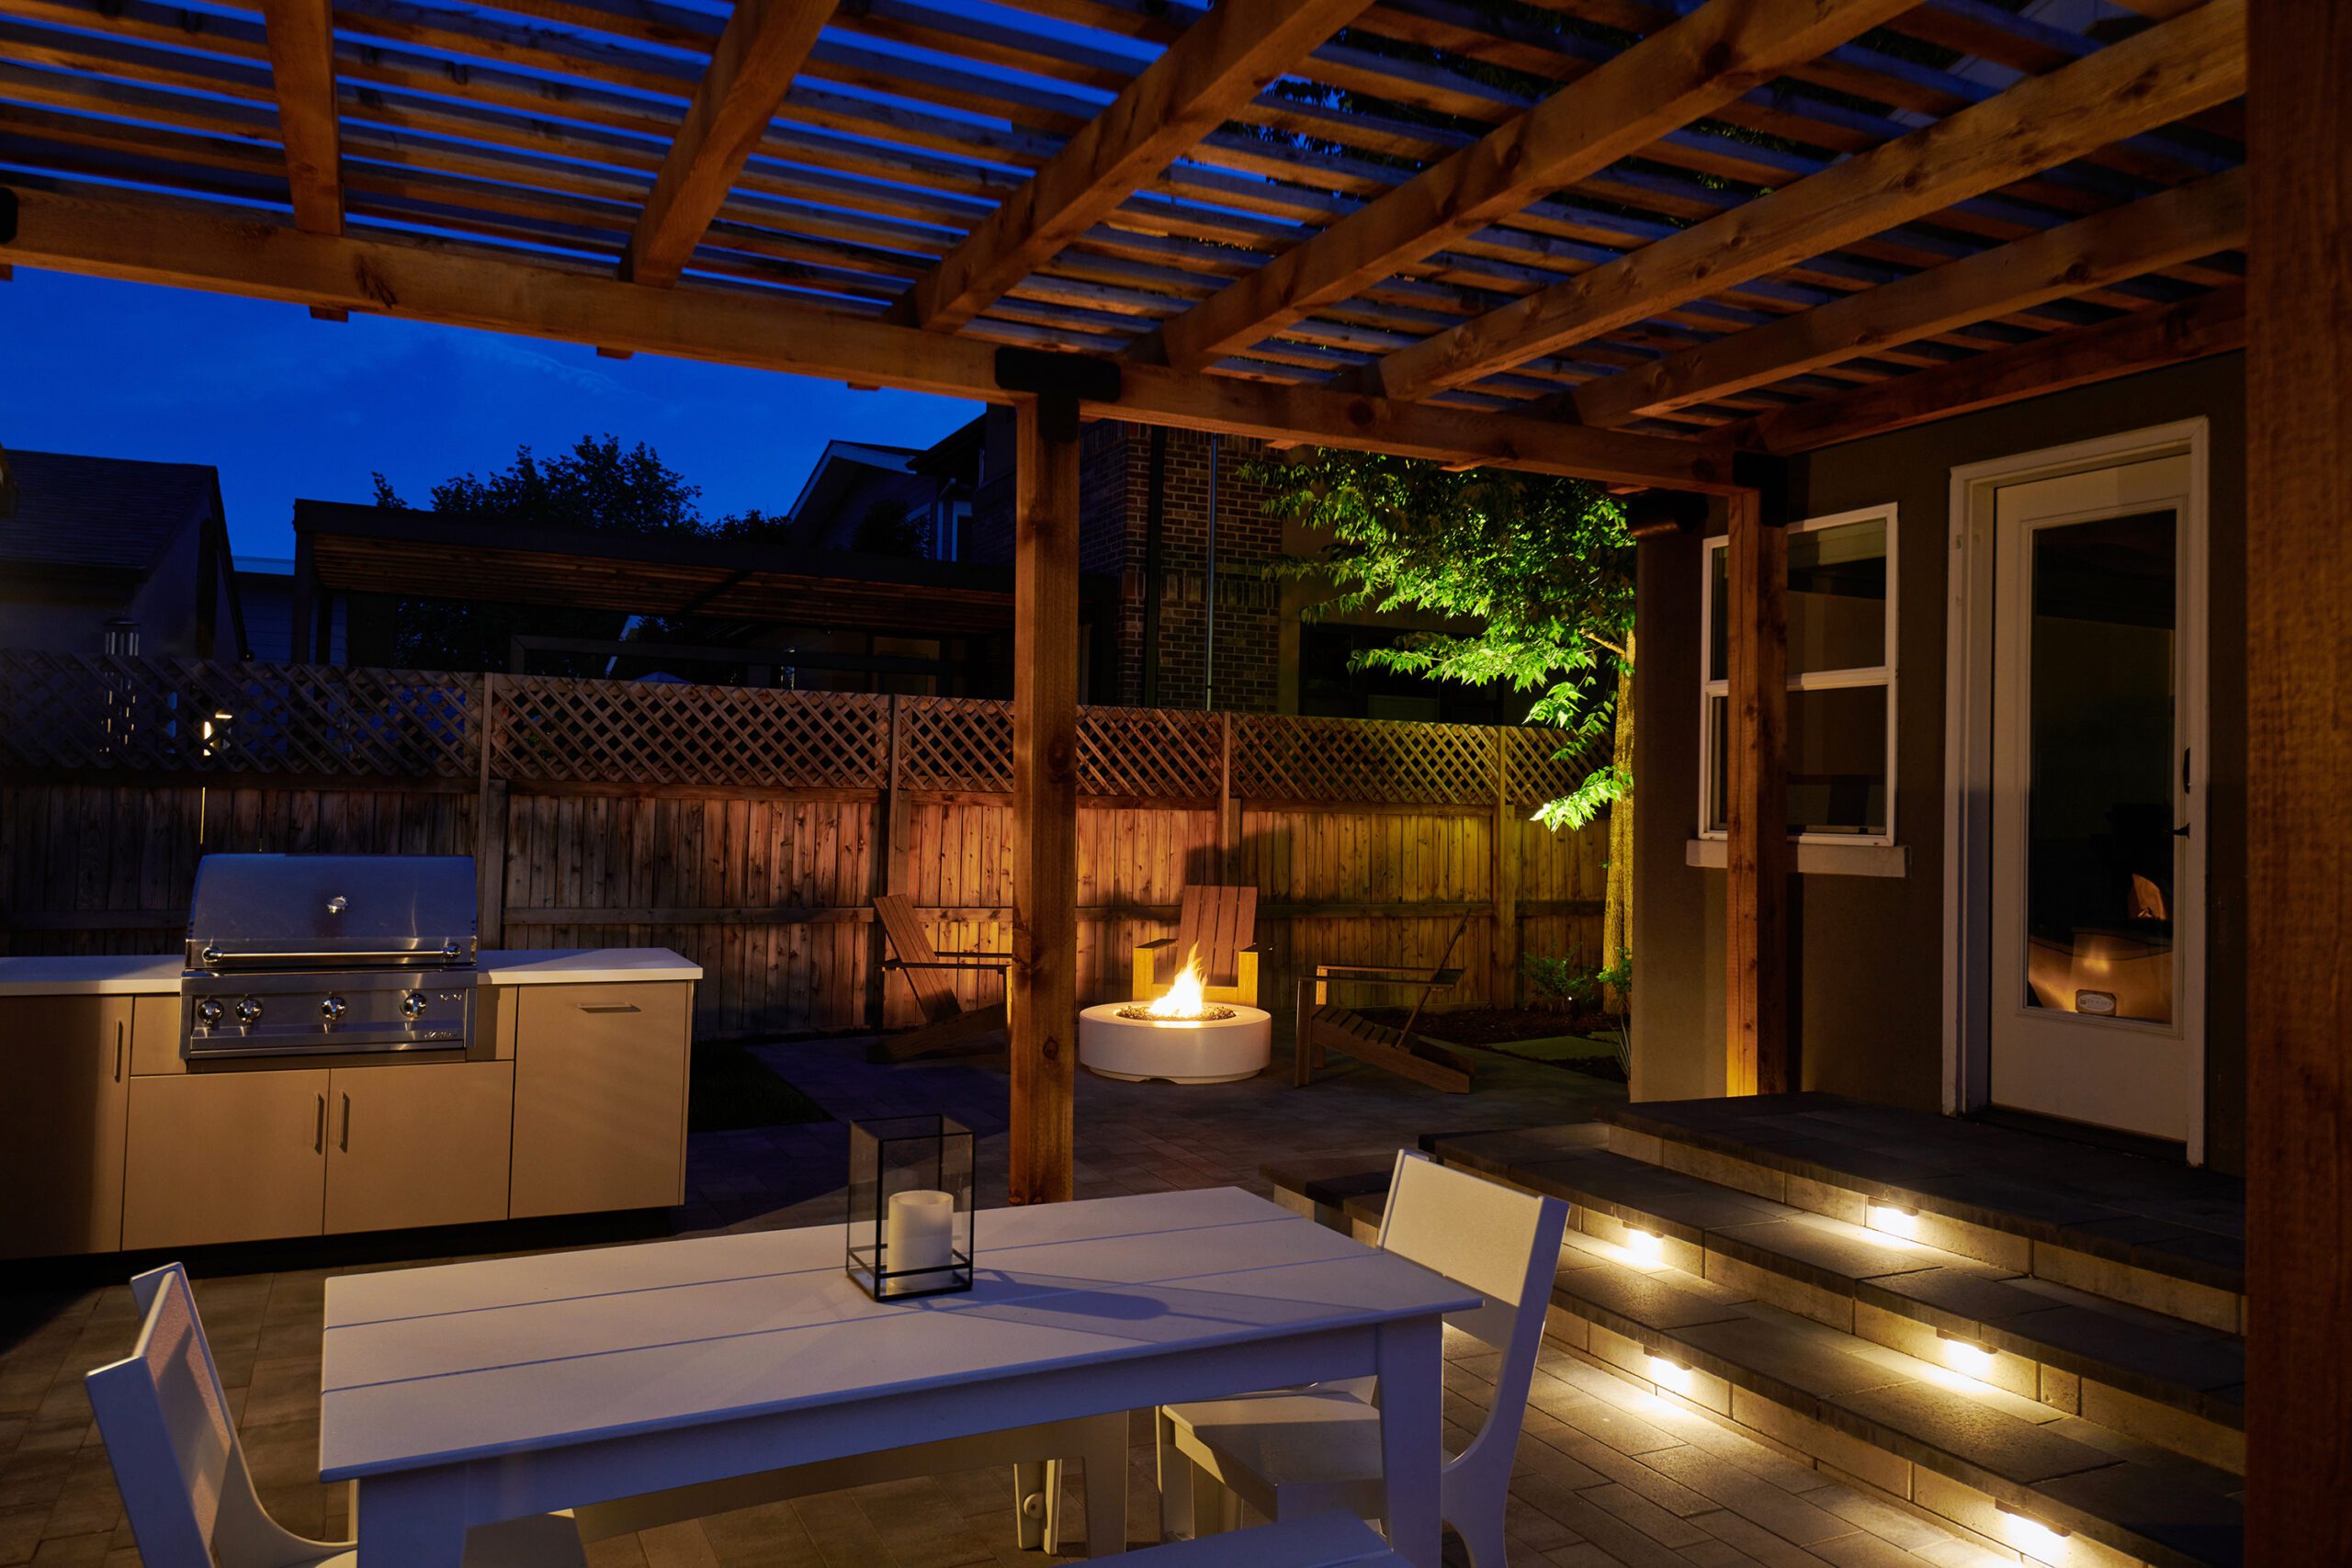 Patio with pergola in Cherry Hills Village, CO